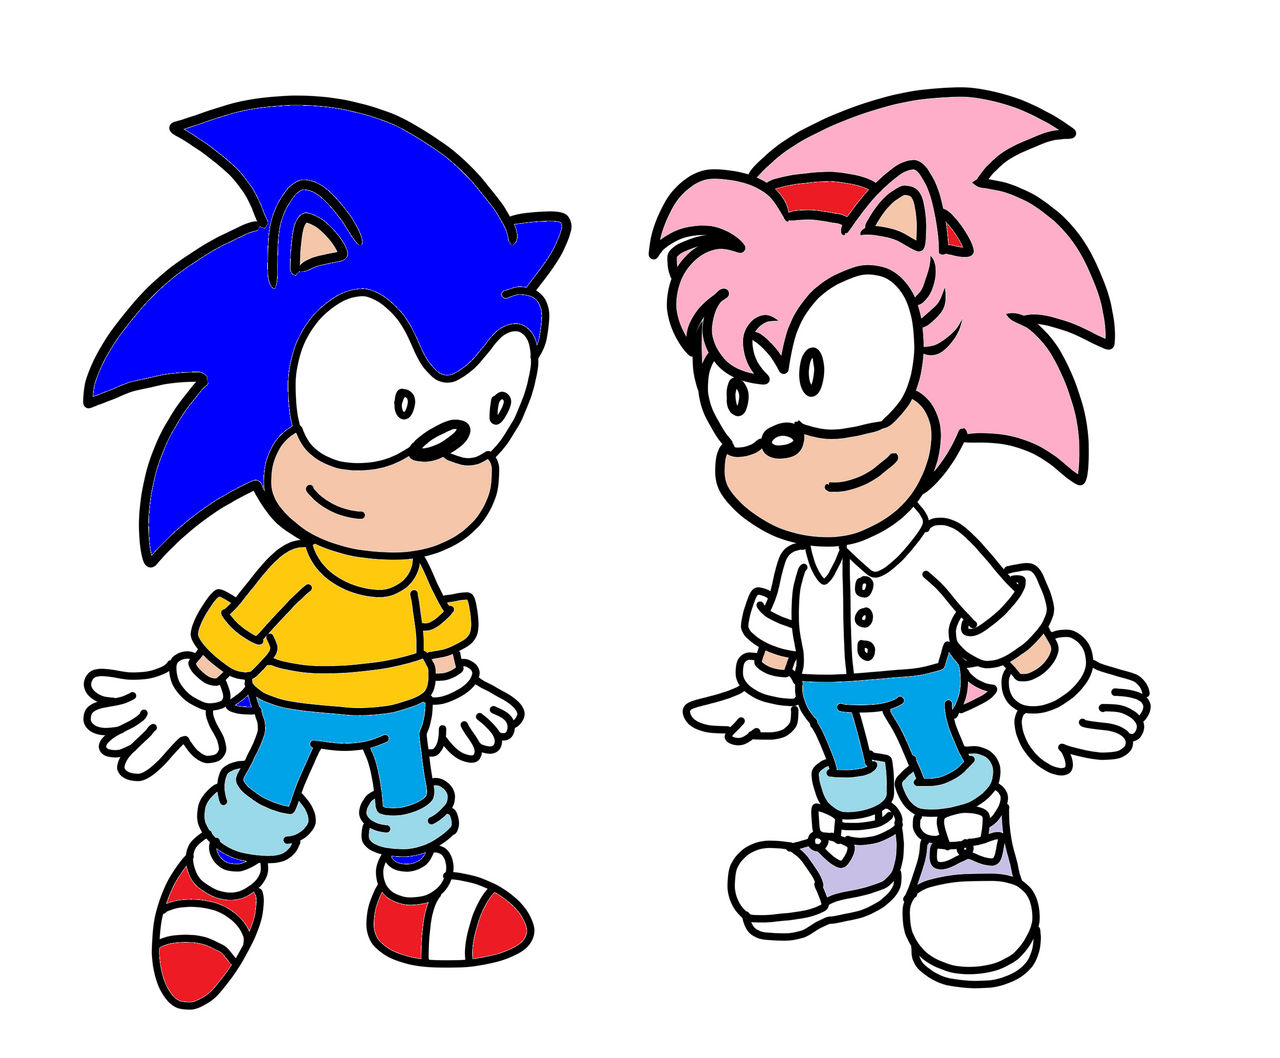 Classic Amy Rose Hugs Classic Sonic by Wbf910 on DeviantArt